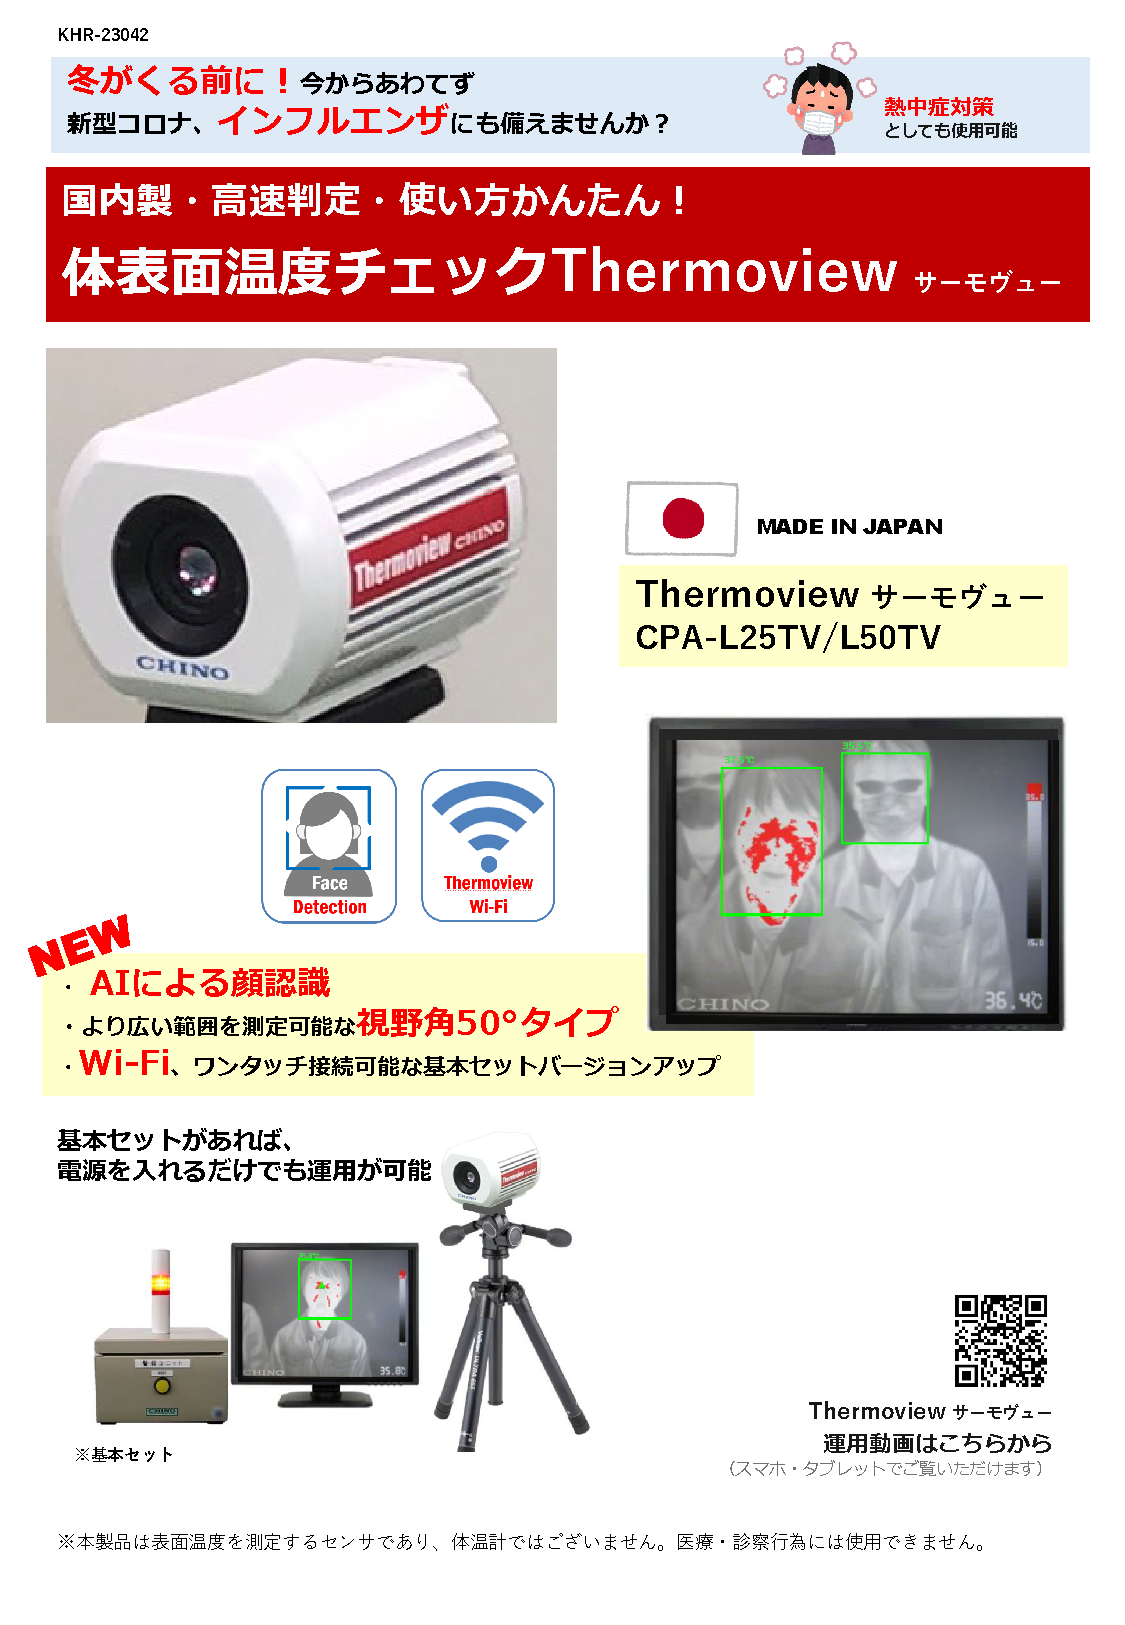 KHR-23042_Made in Japan Thermoview